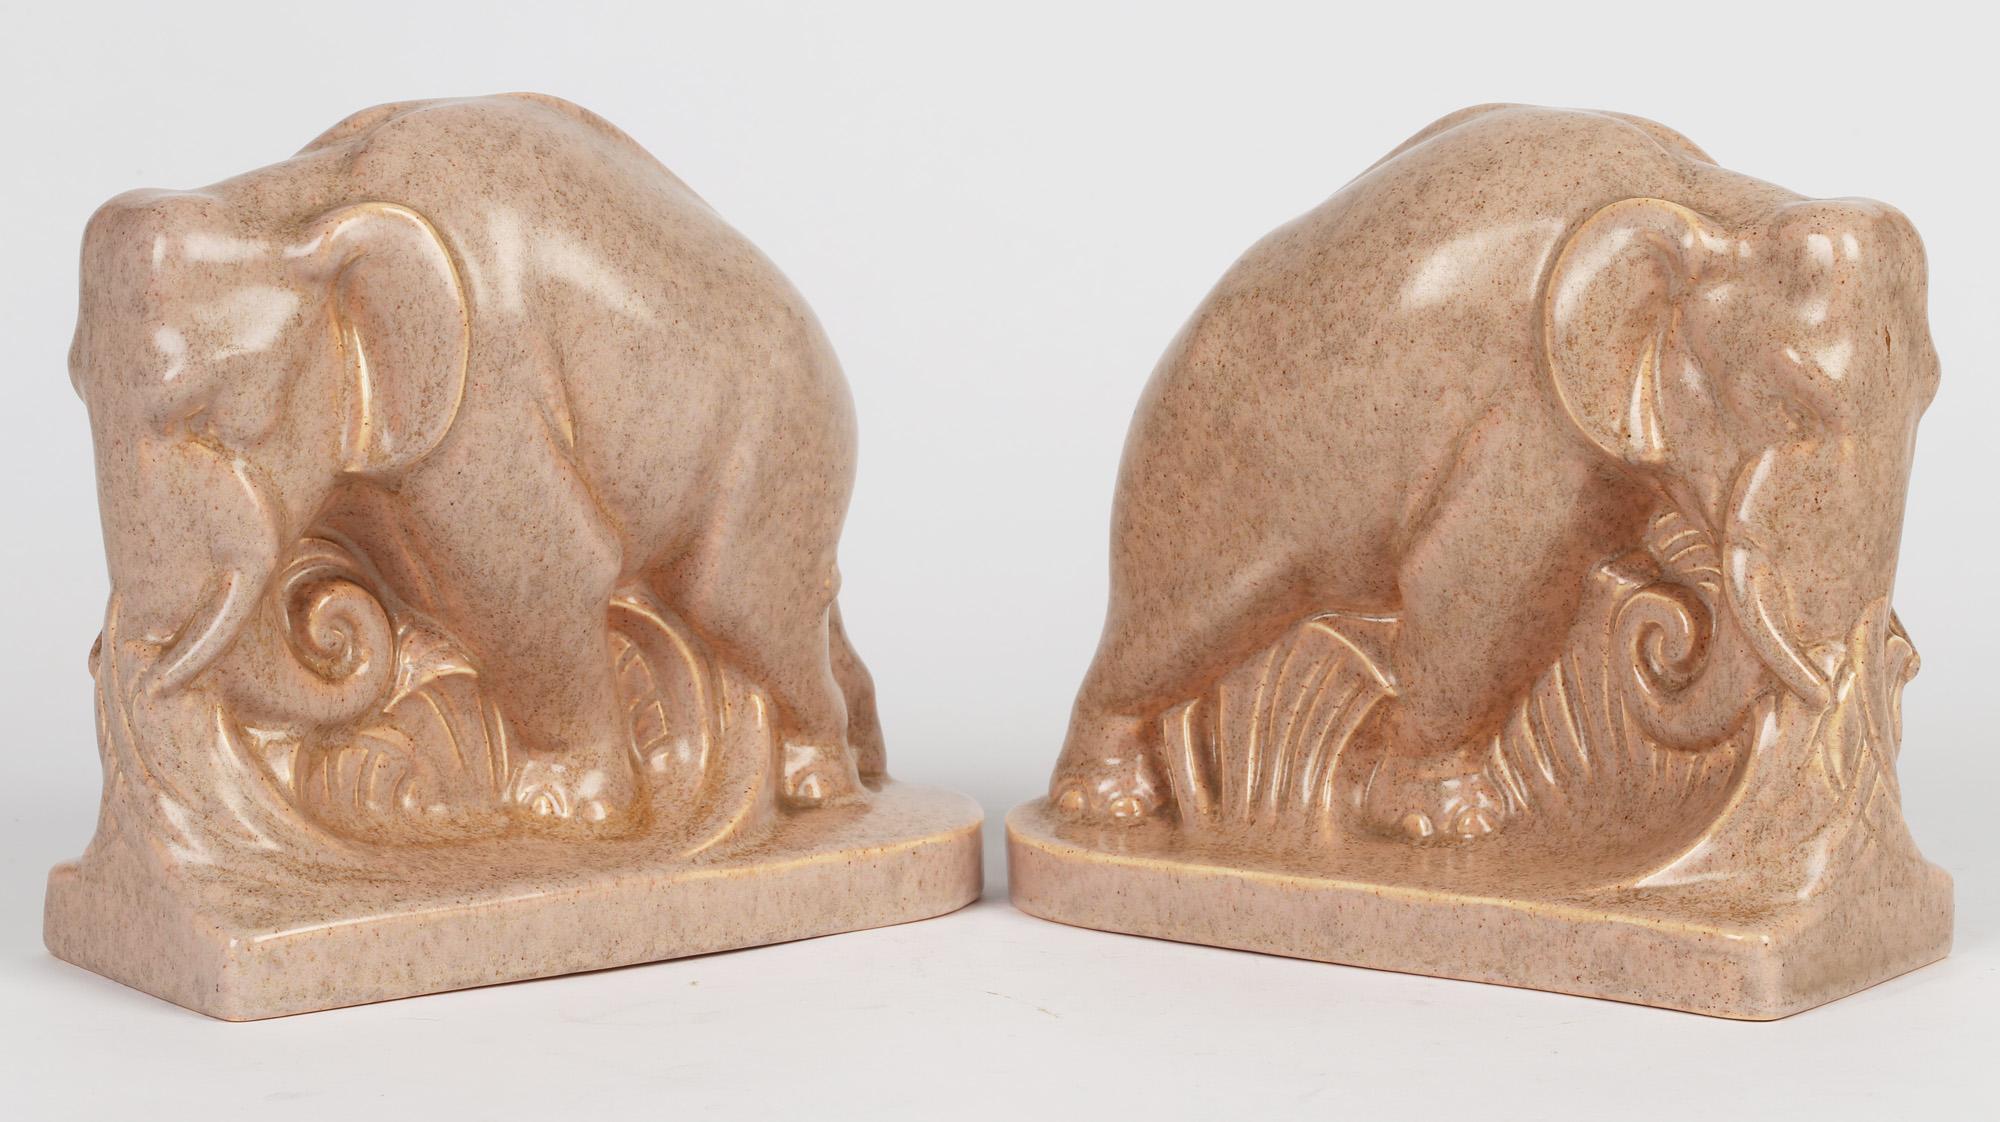 A fine and scarce pair Art Deco Carter, Stabler & Adams Poole pottery elephant bookends designed by Harold Brownsworth (1885-1964) and dating from the late 1920's. The elephants stand raised on a shaped base and are well modeled with their heads